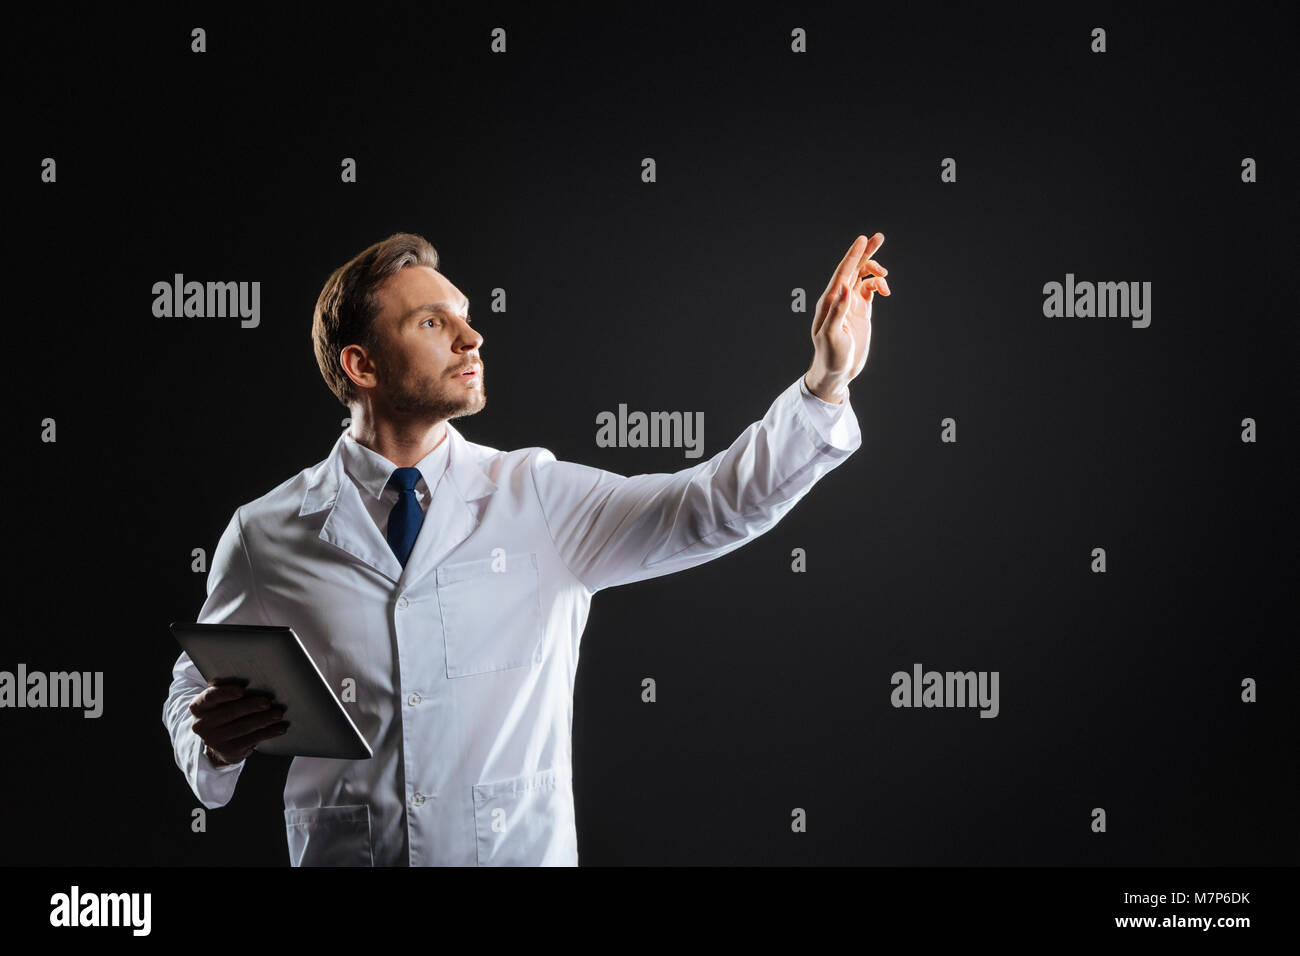 Smart concentrated medic standing and holding hand up. Stock Photo